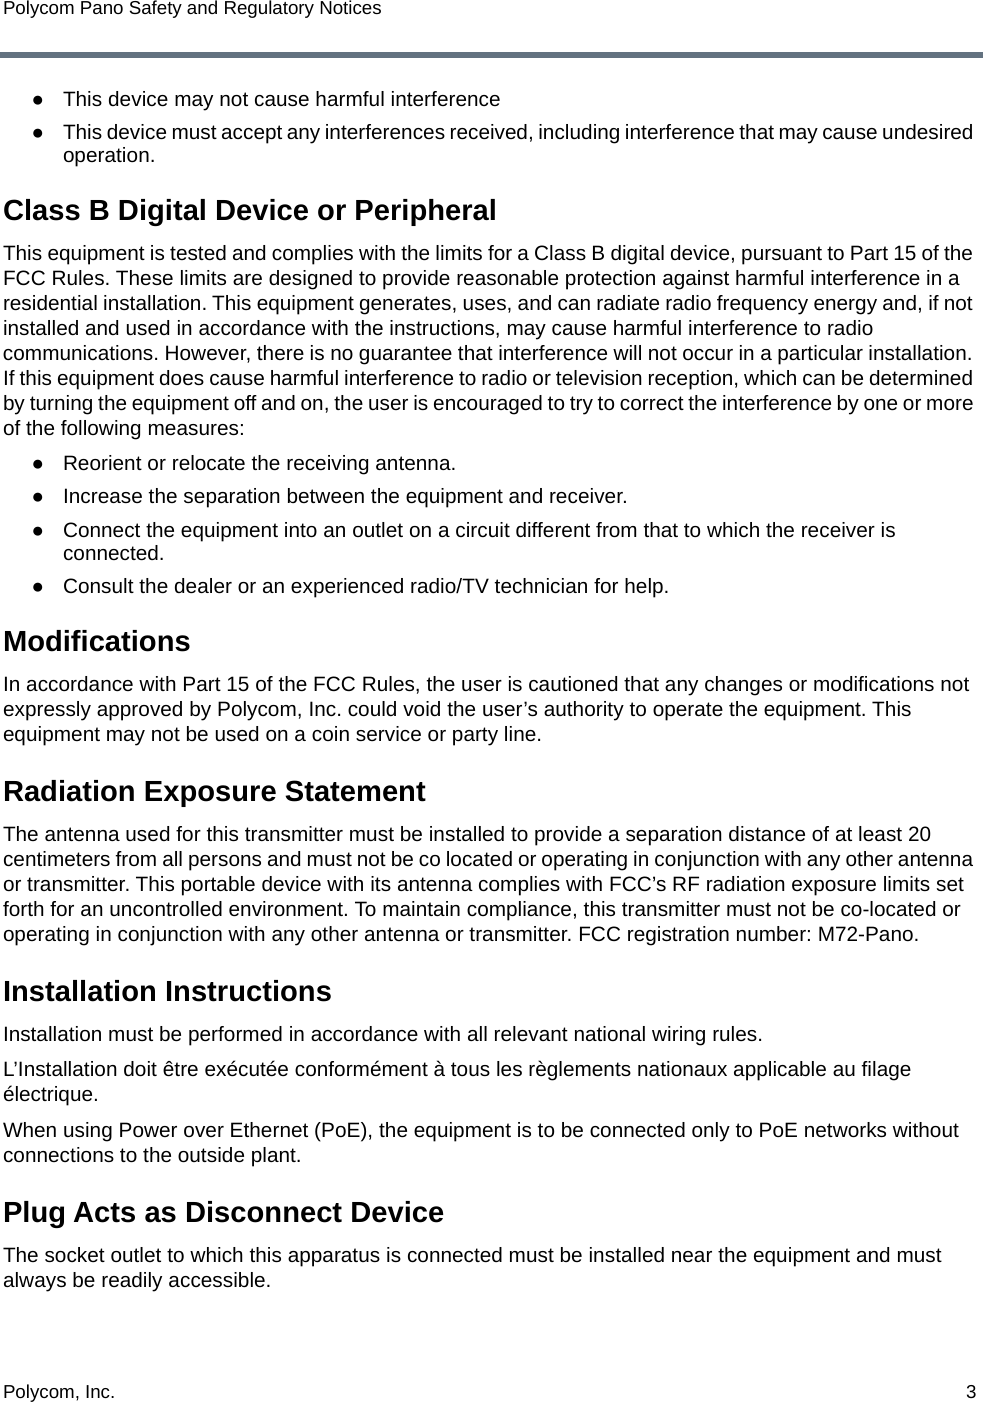 Polycom, Inc.  3Polycom Pano Safety and Regulatory Notices●This device may not cause harmful interference●This device must accept any interferences received, including interference that may cause undesired operation.Class B Digital Device or PeripheralThis equipment is tested and complies with the limits for a Class B digital device, pursuant to Part 15 of the FCC Rules. These limits are designed to provide reasonable protection against harmful interference in a residential installation. This equipment generates, uses, and can radiate radio frequency energy and, if not installed and used in accordance with the instructions, may cause harmful interference to radio communications. However, there is no guarantee that interference will not occur in a particular installation. If this equipment does cause harmful interference to radio or television reception, which can be determined by turning the equipment off and on, the user is encouraged to try to correct the interference by one or more of the following measures:●Reorient or relocate the receiving antenna.●Increase the separation between the equipment and receiver.●Connect the equipment into an outlet on a circuit different from that to which the receiver is connected.●Consult the dealer or an experienced radio/TV technician for help.ModificationsIn accordance with Part 15 of the FCC Rules, the user is cautioned that any changes or modifications not expressly approved by Polycom, Inc. could void the user’s authority to operate the equipment. This equipment may not be used on a coin service or party line. Radiation Exposure StatementThe antenna used for this transmitter must be installed to provide a separation distance of at least 20 centimeters from all persons and must not be co located or operating in conjunction with any other antenna or transmitter. This portable device with its antenna complies with FCC’s RF radiation exposure limits set forth for an uncontrolled environment. To maintain compliance, this transmitter must not be co-located or operating in conjunction with any other antenna or transmitter. FCC registration number: M72-Pano.Installation InstructionsInstallation must be performed in accordance with all relevant national wiring rules.L’Installation doit être exécutée conformément à tous les règlements nationaux applicable au filage électrique.When using Power over Ethernet (PoE), the equipment is to be connected only to PoE networks without connections to the outside plant.Plug Acts as Disconnect DeviceThe socket outlet to which this apparatus is connected must be installed near the equipment and must always be readily accessible.